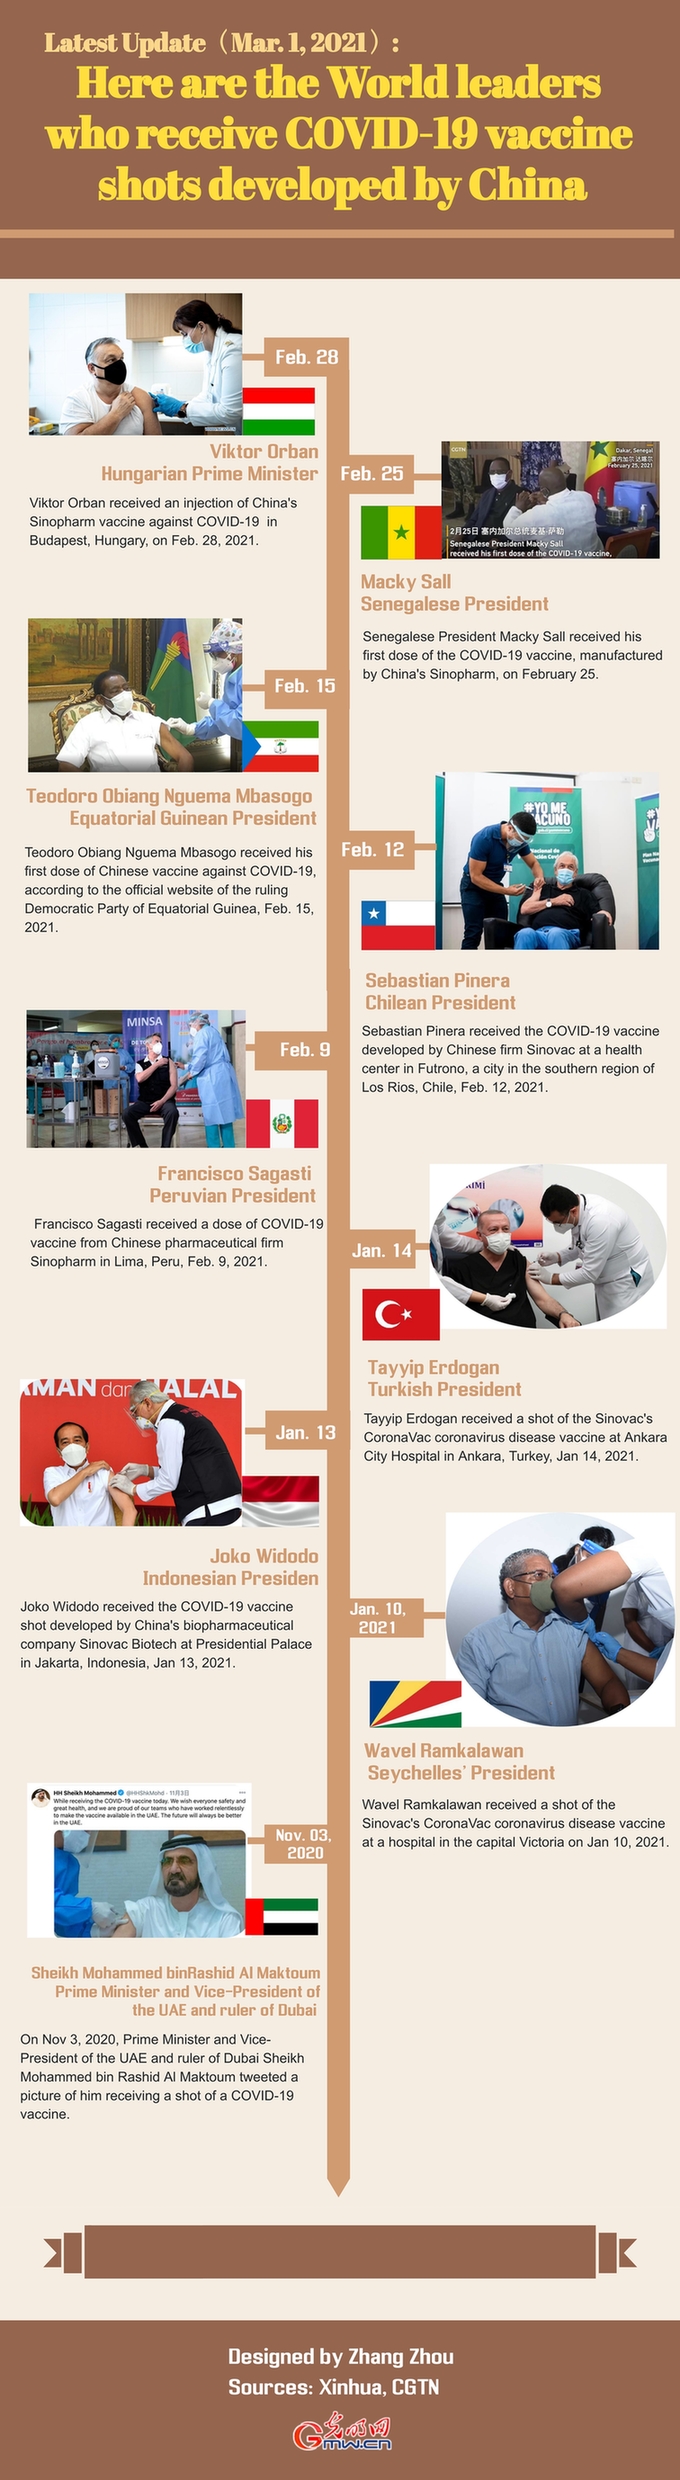 Infographic: Here are the world leaders who receive COVID-19 vaccine shots developed by China (Mar. 1, 2021)